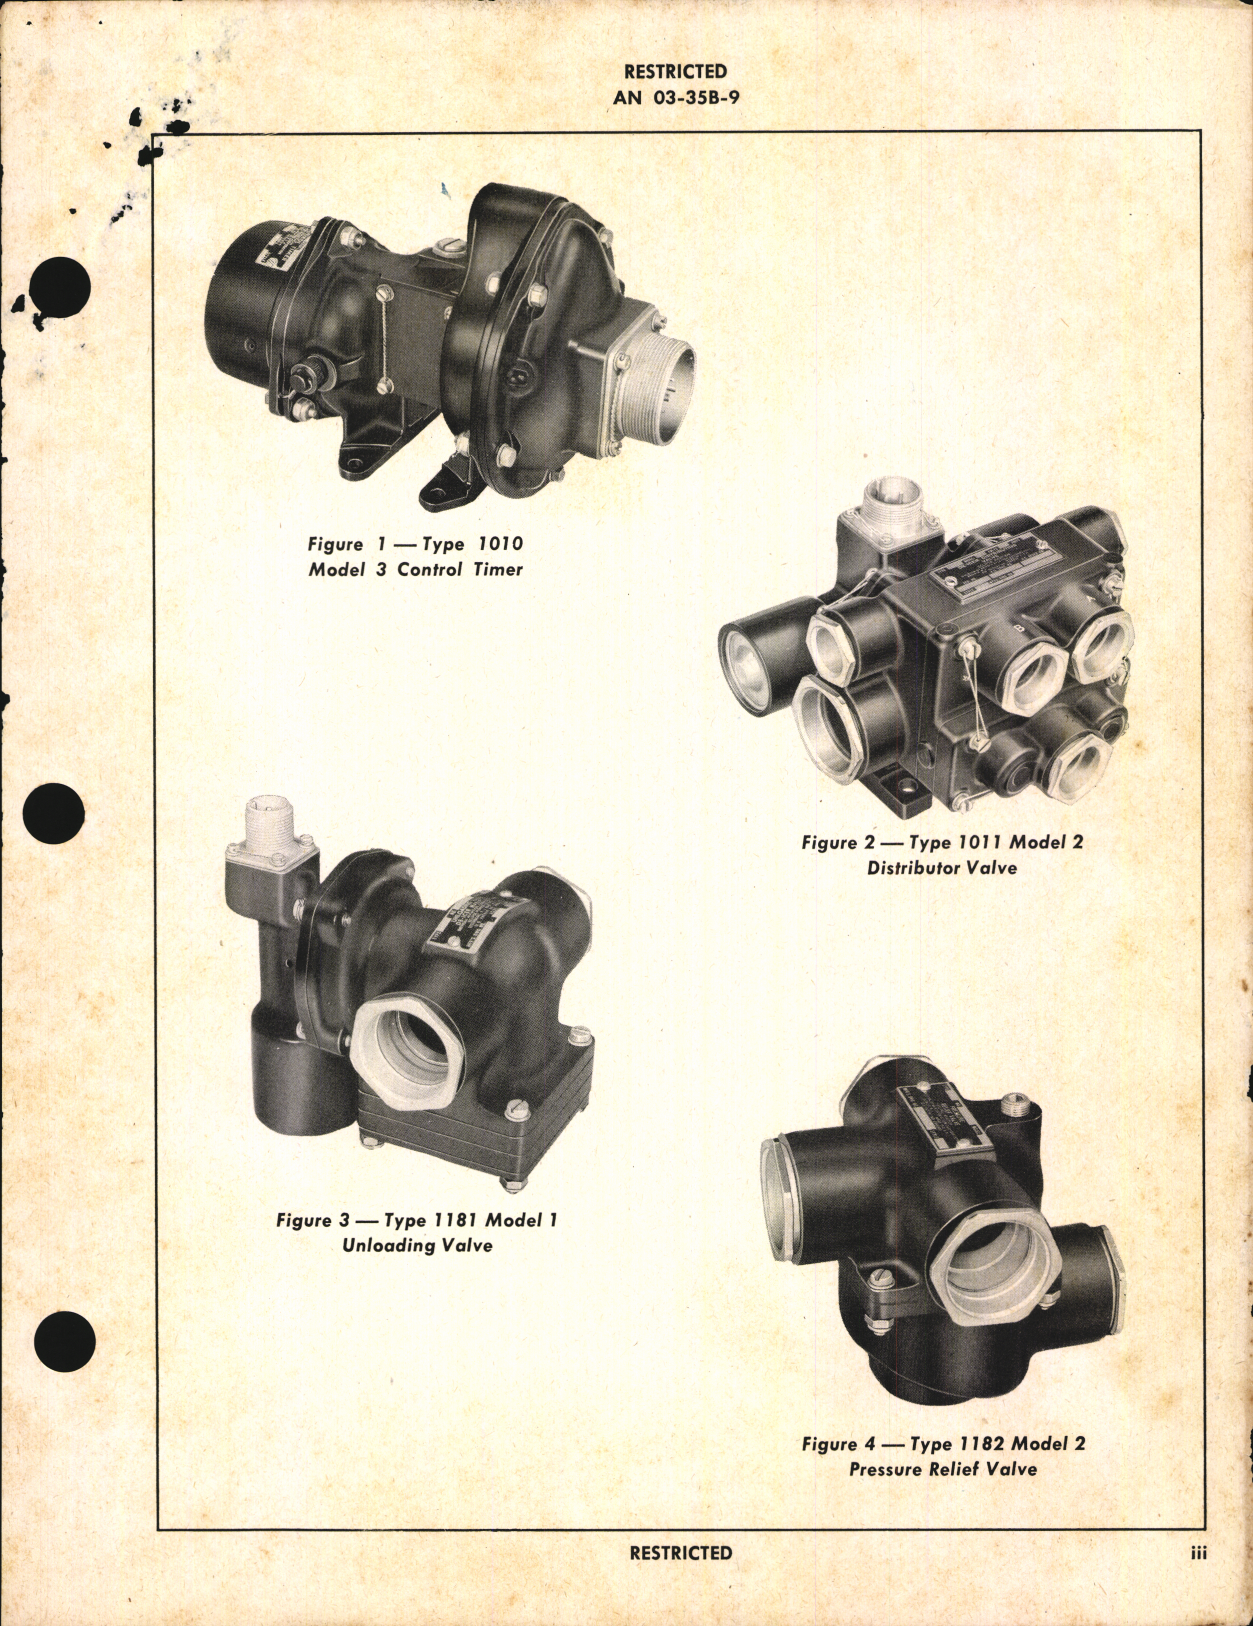 Sample page 5 from AirCorps Library document: Handbook of Instructions with Parts Catalog for De-Icer System Valves